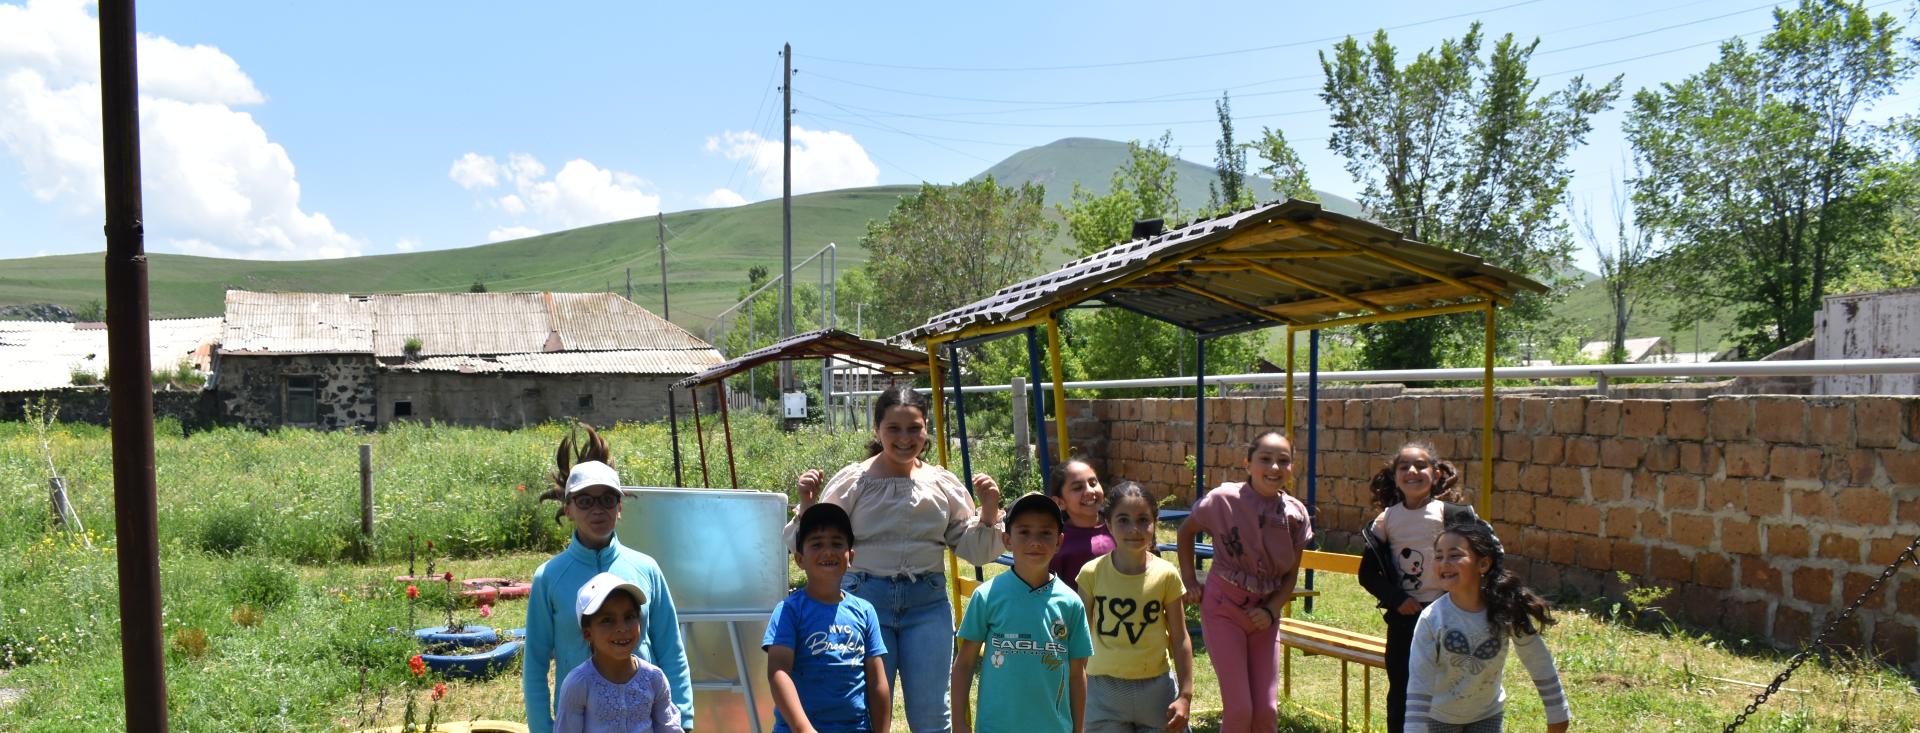 A group of ten children are standing together outside in the grass wearing casual clothes. A few of the children are jumping in the air with big smiles on their faces. The others are also smiling and looking happy. There is playground equipment, buildings, and mountains in the background